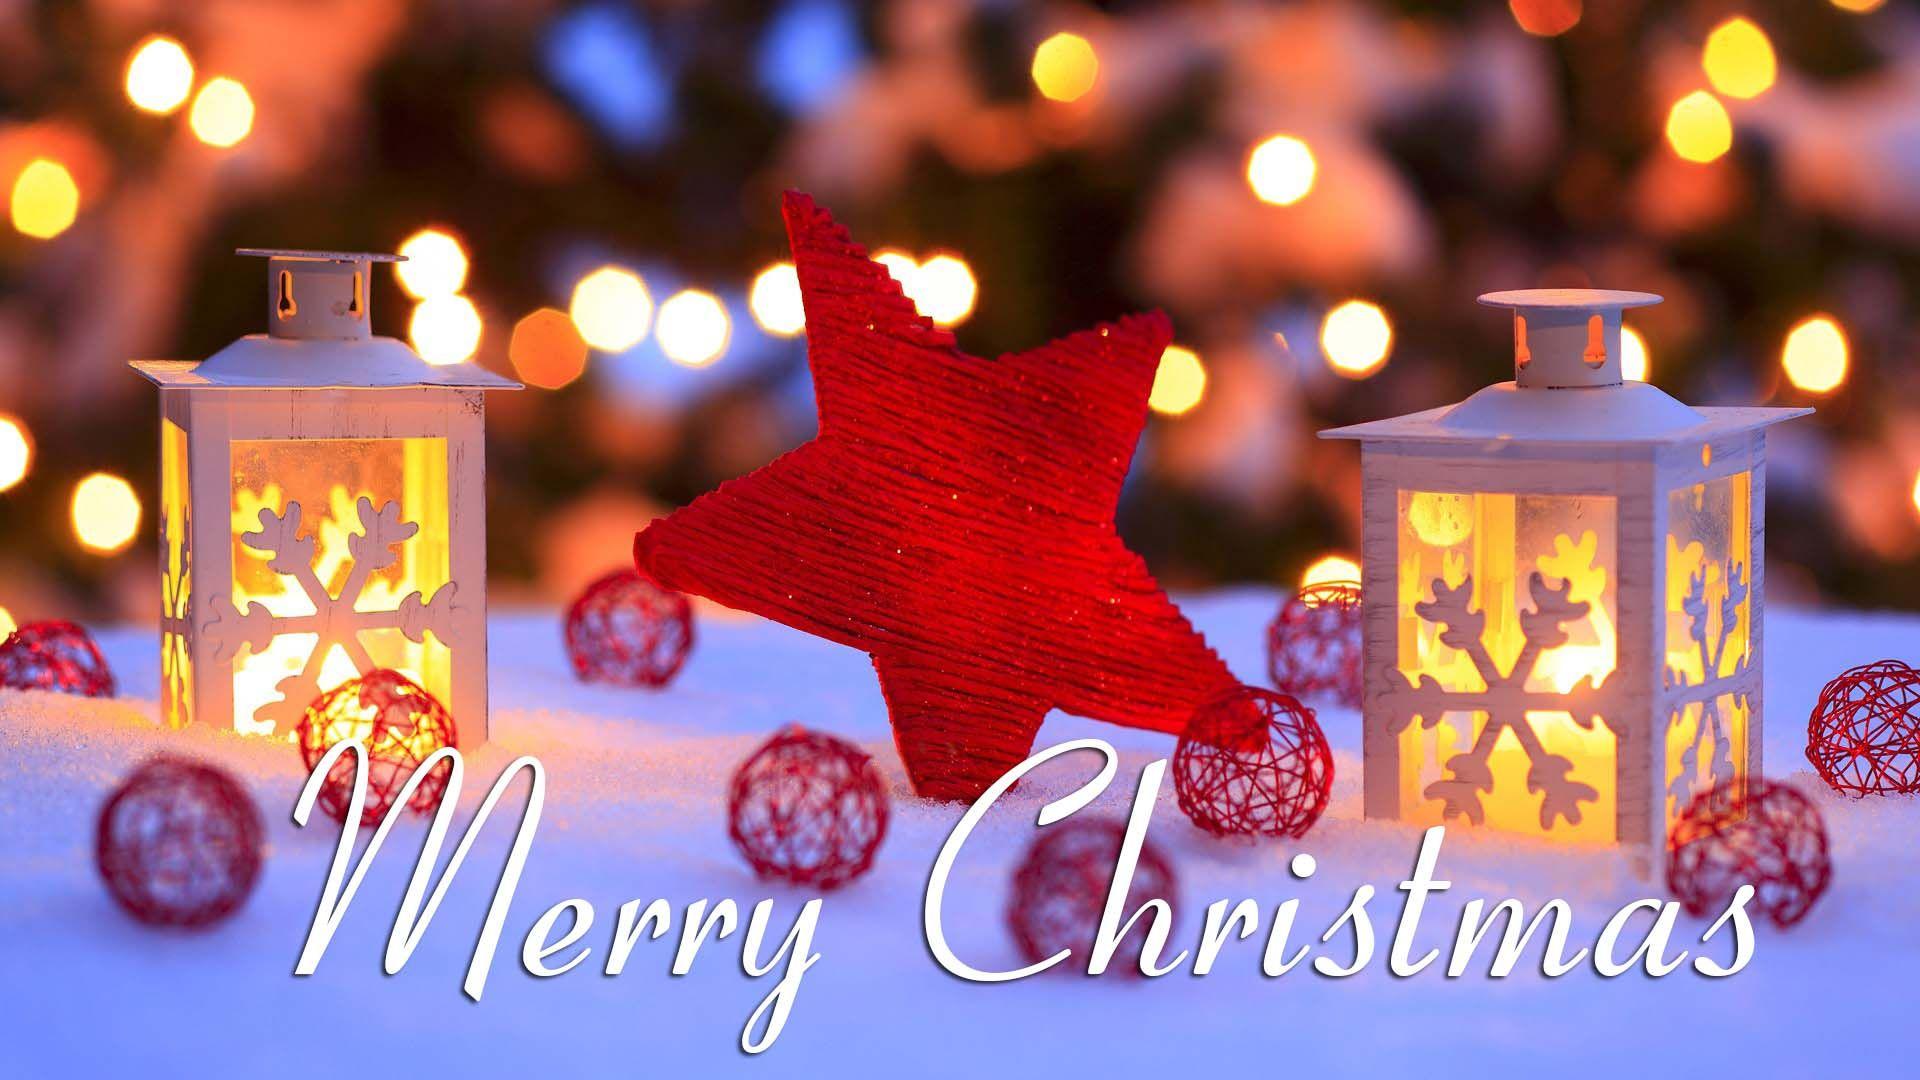 Merry Christmas And Happy New Year Hd Free Wallpaper For